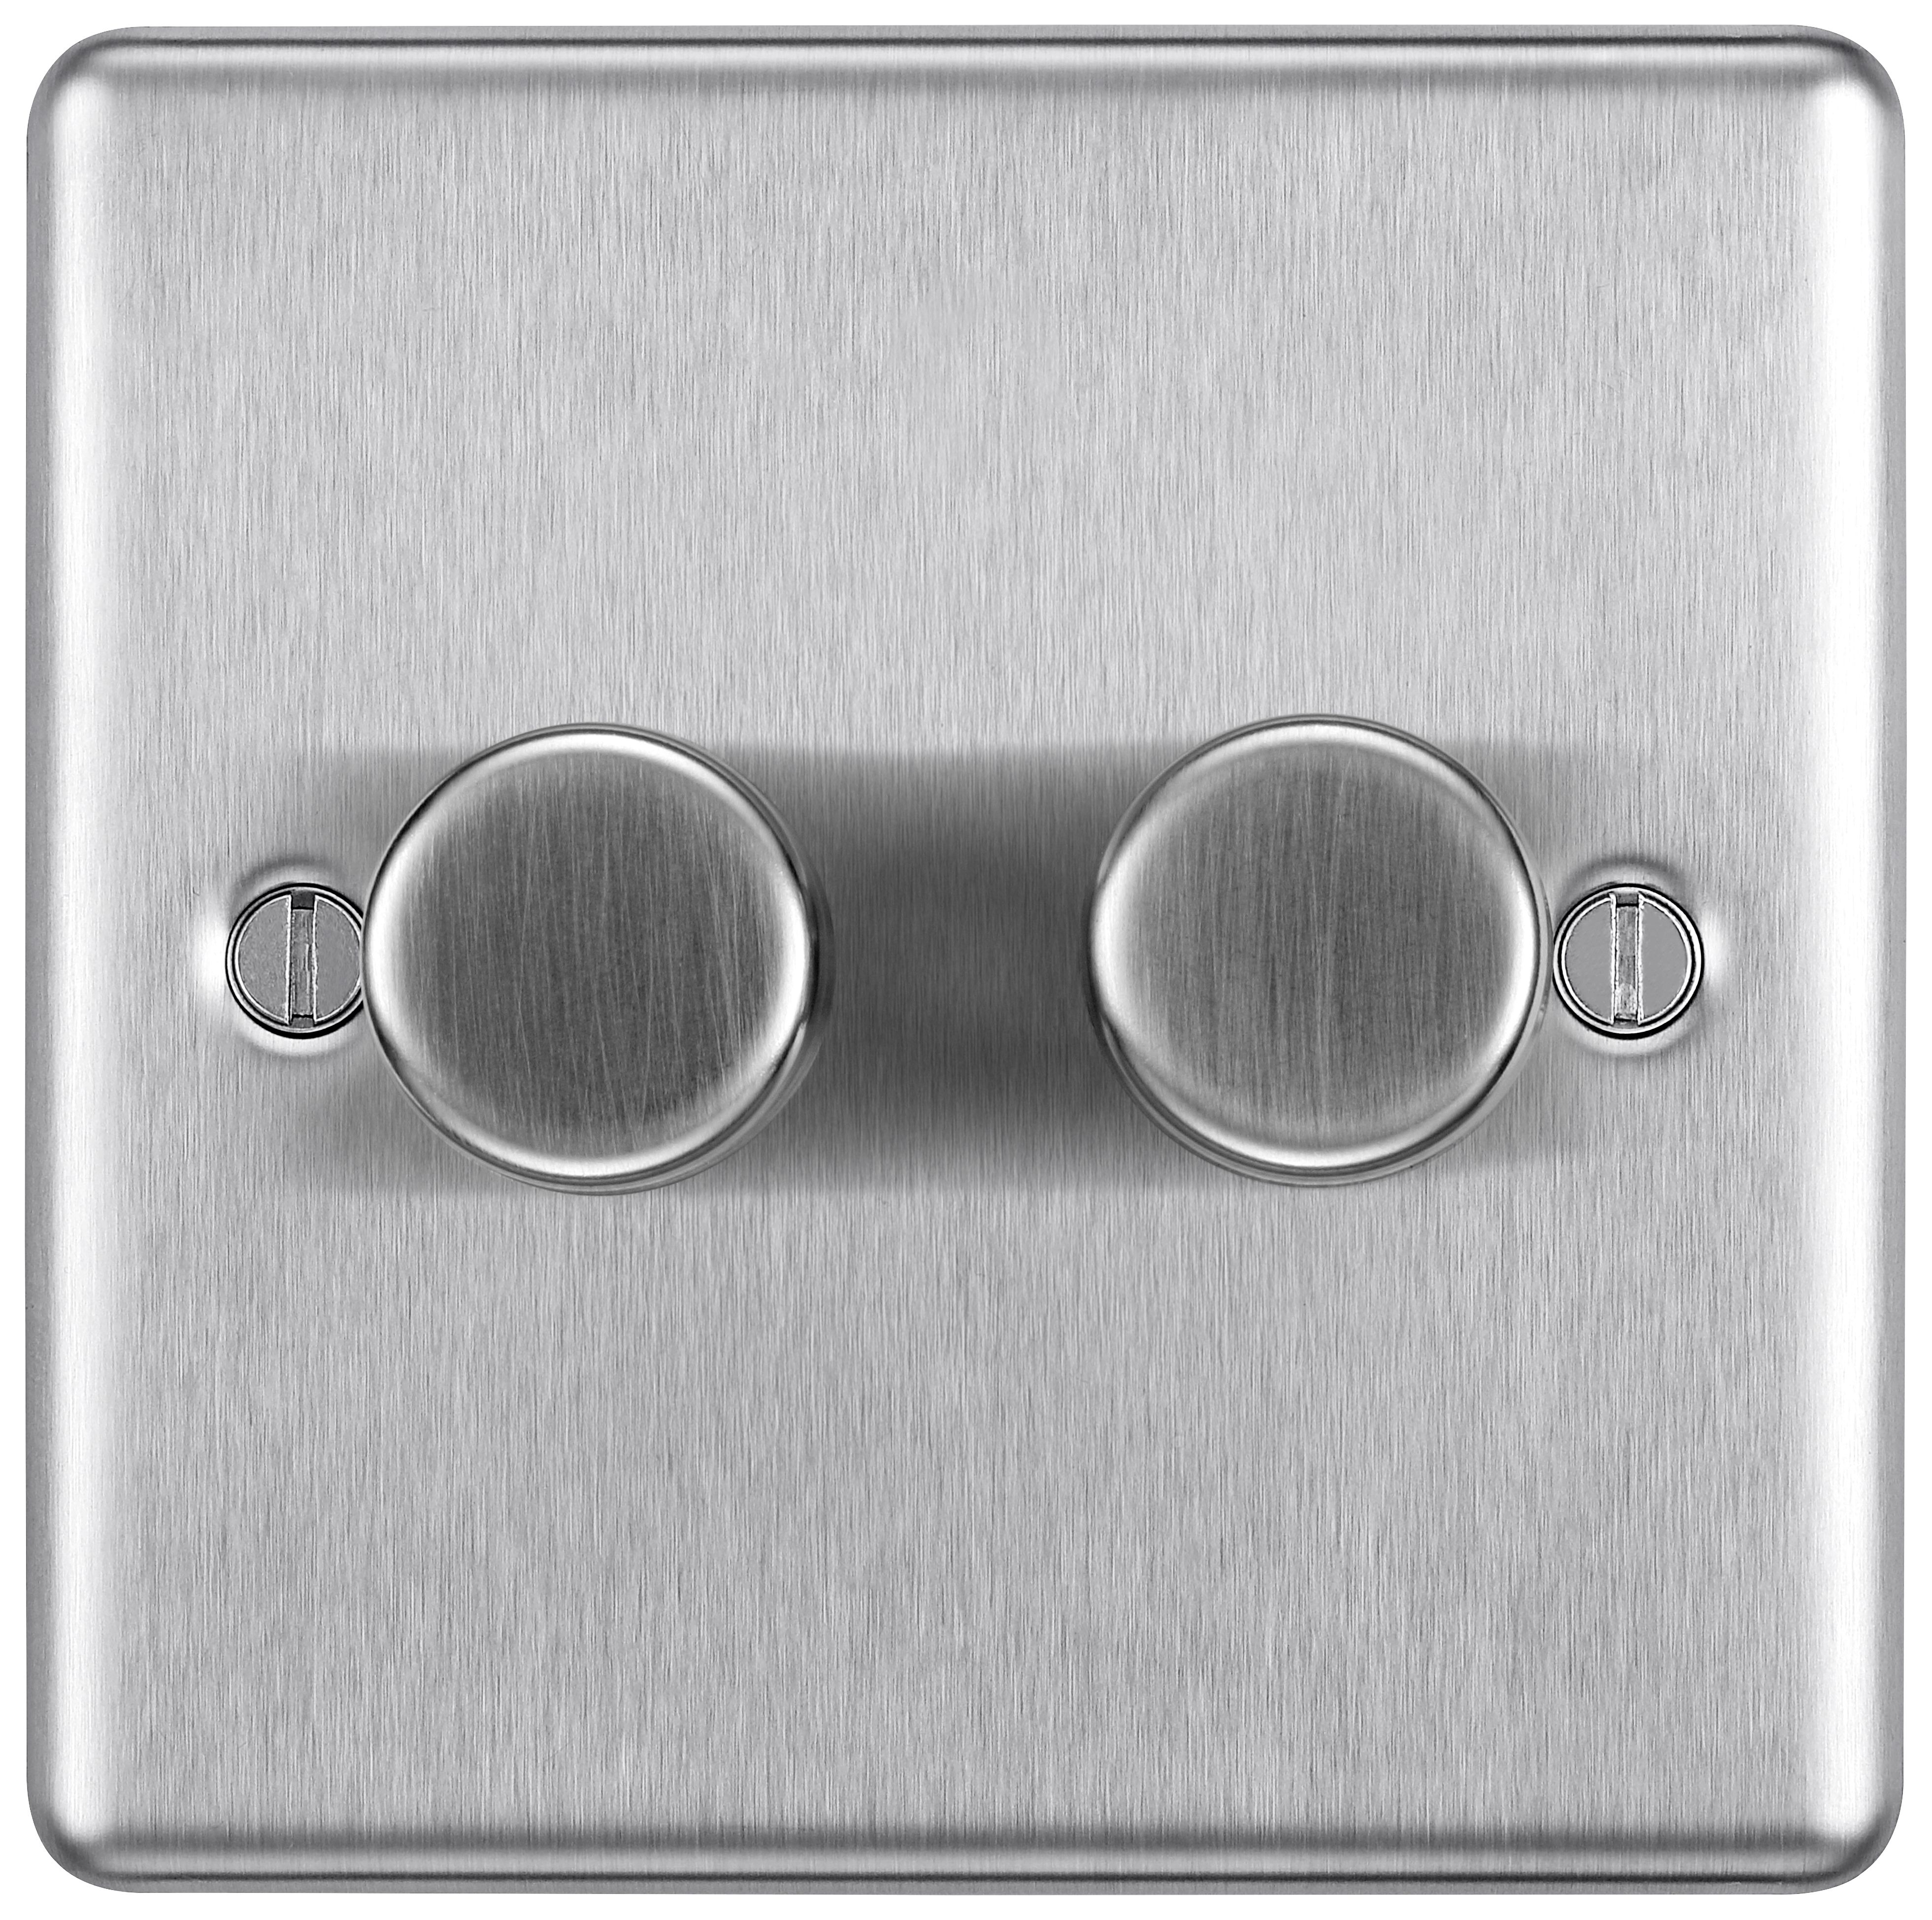 Image of BG 400W Screwed Raised Plate Double Dimmer Switch 2-Way Push On/Off - Brushed Steel